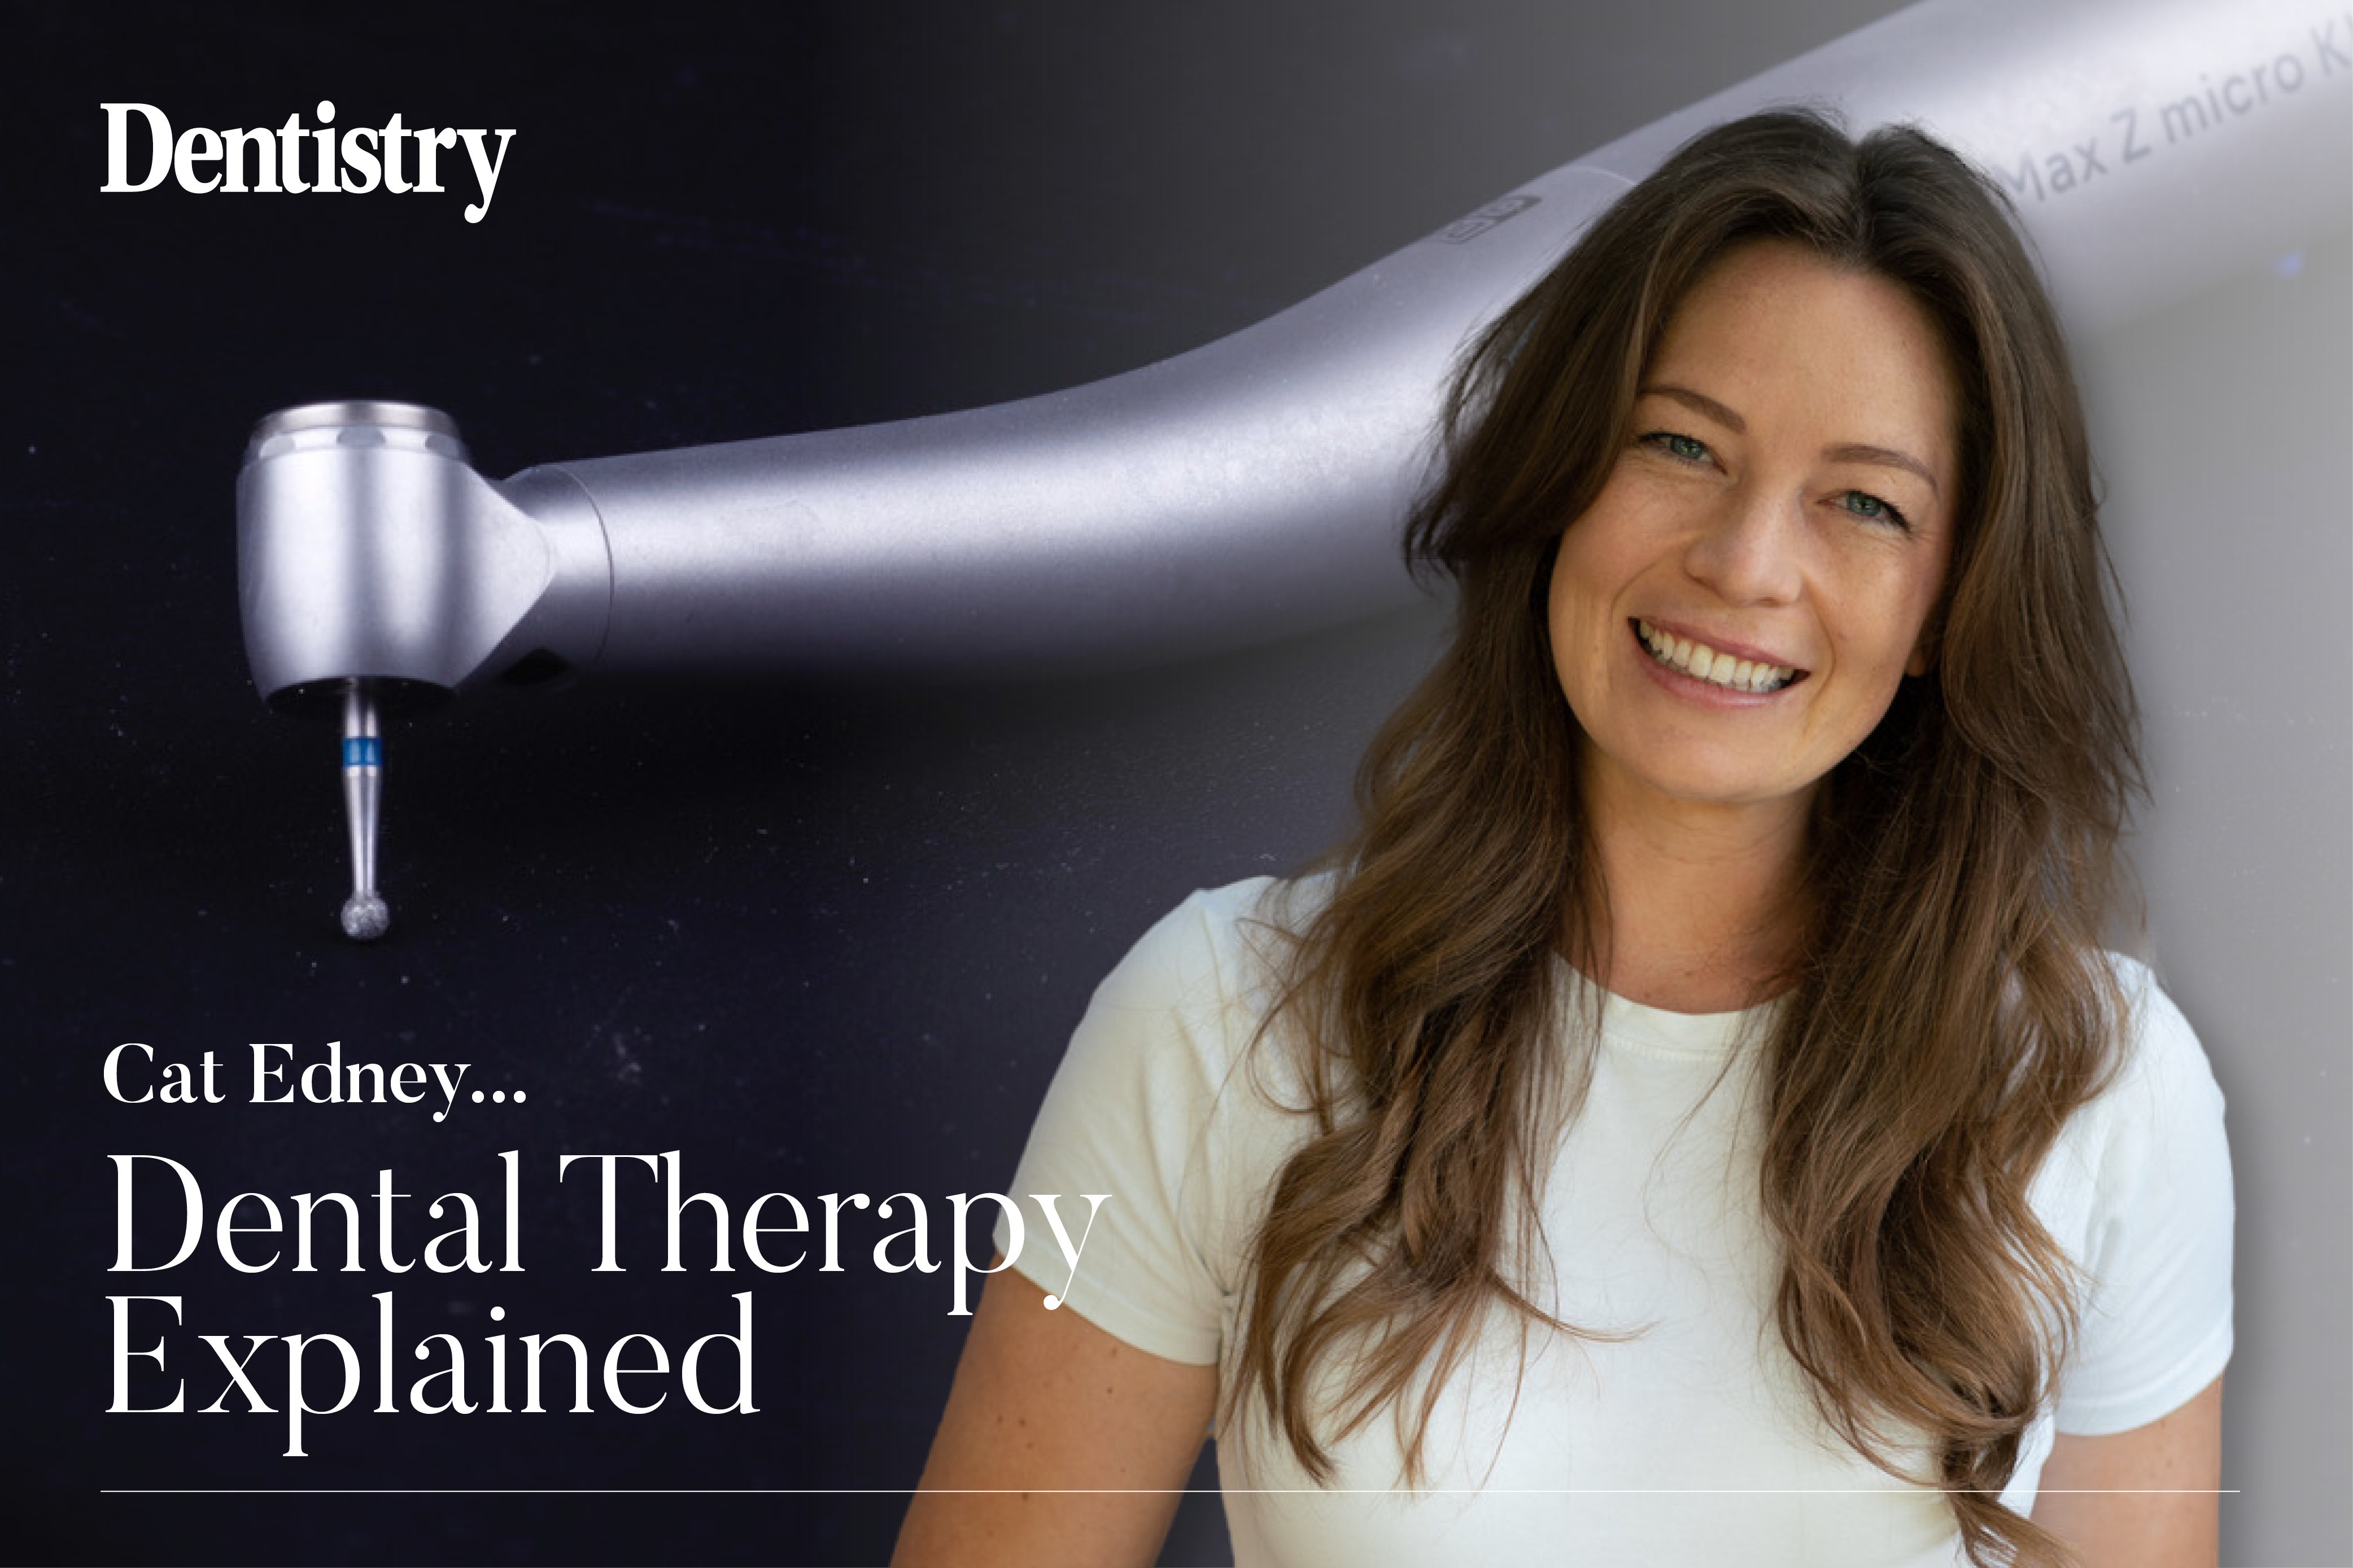 Through her brand new column, Cat Edney hopes to dispel the common myths attached to the role of the dental therapist. This month she breaks down the full scope of practice of dental therapists and how to integrate them into practice. 